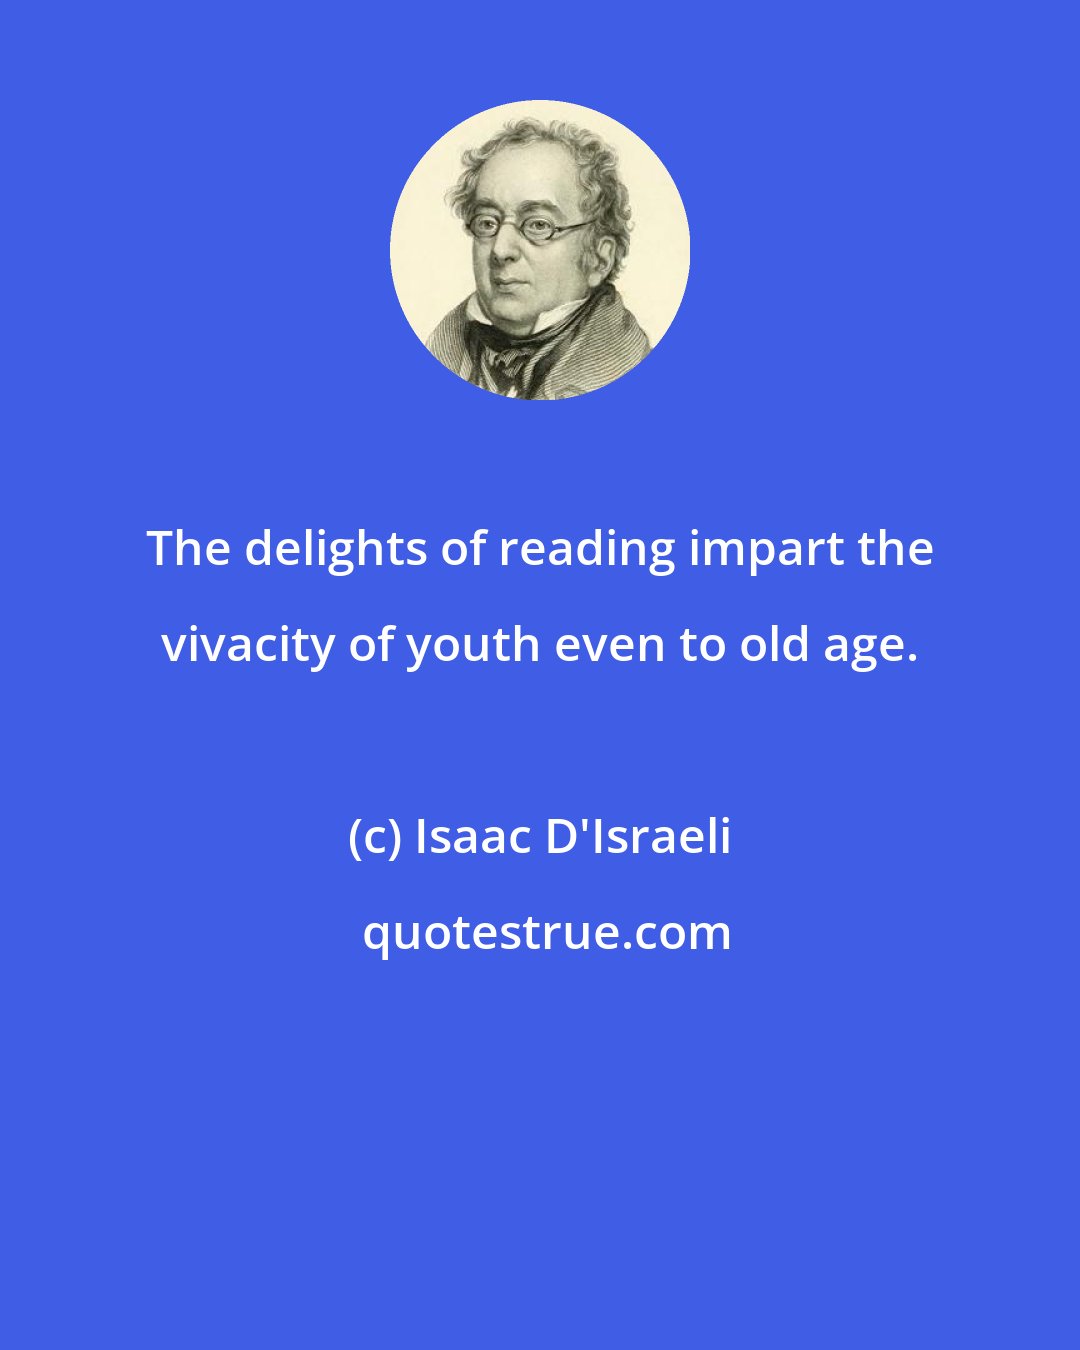 Isaac D'Israeli: The delights of reading impart the vivacity of youth even to old age.